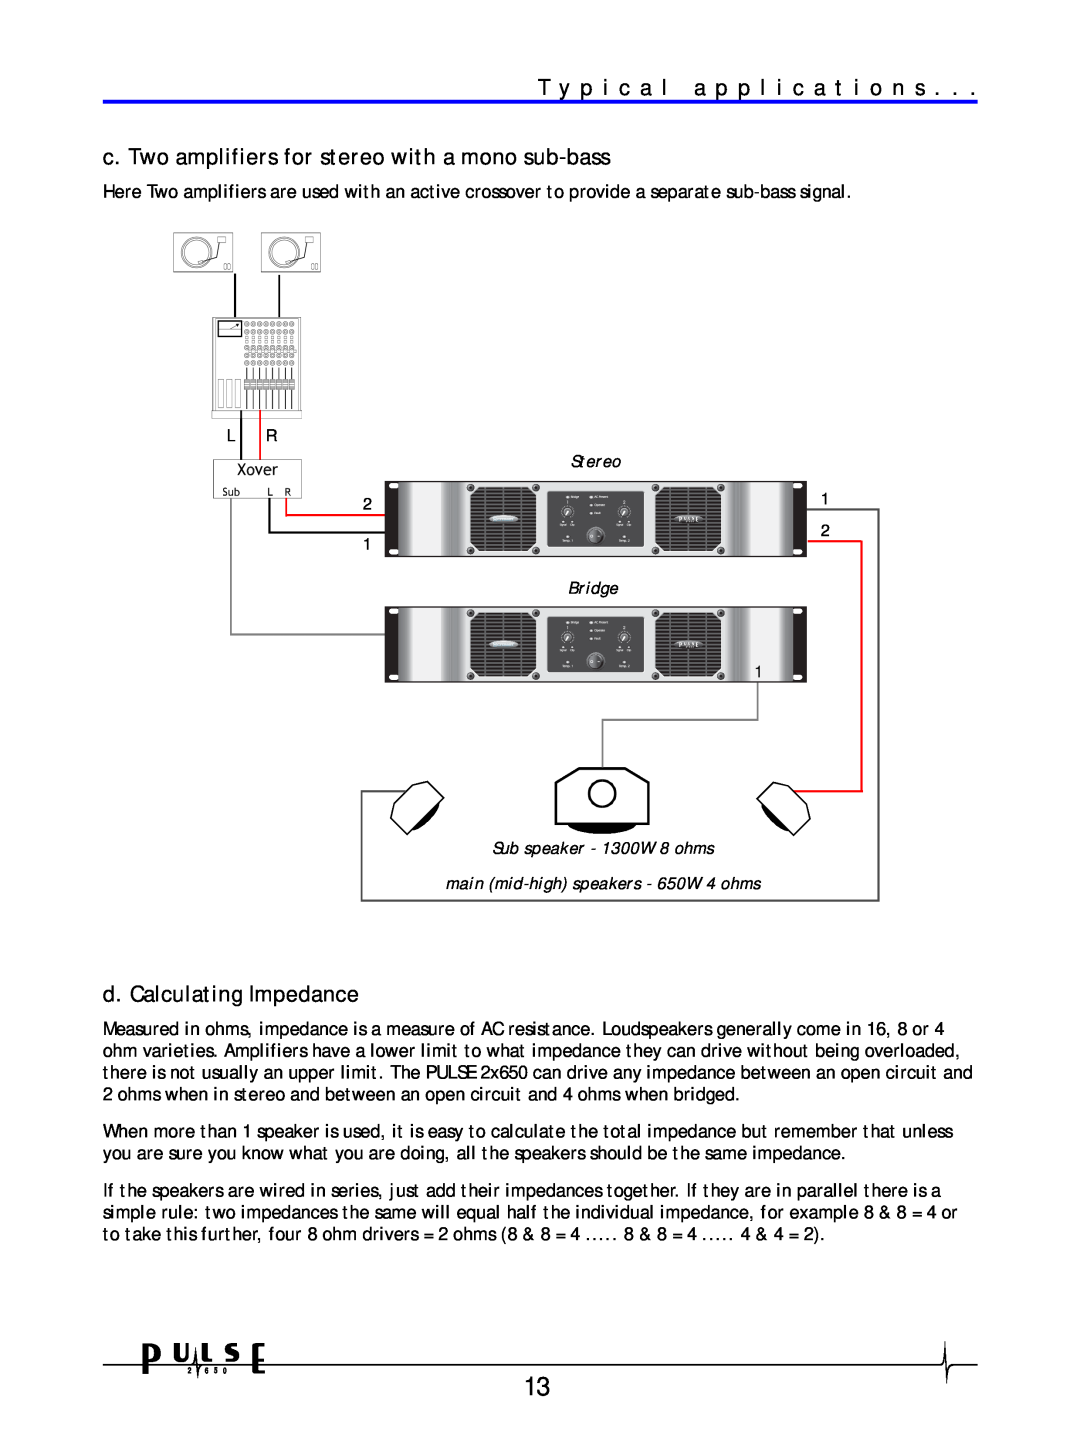 Crown Audio 2650 user manual c. Two amplifiers for stereo with a mono sub-bass, d. Calculating Impedance 